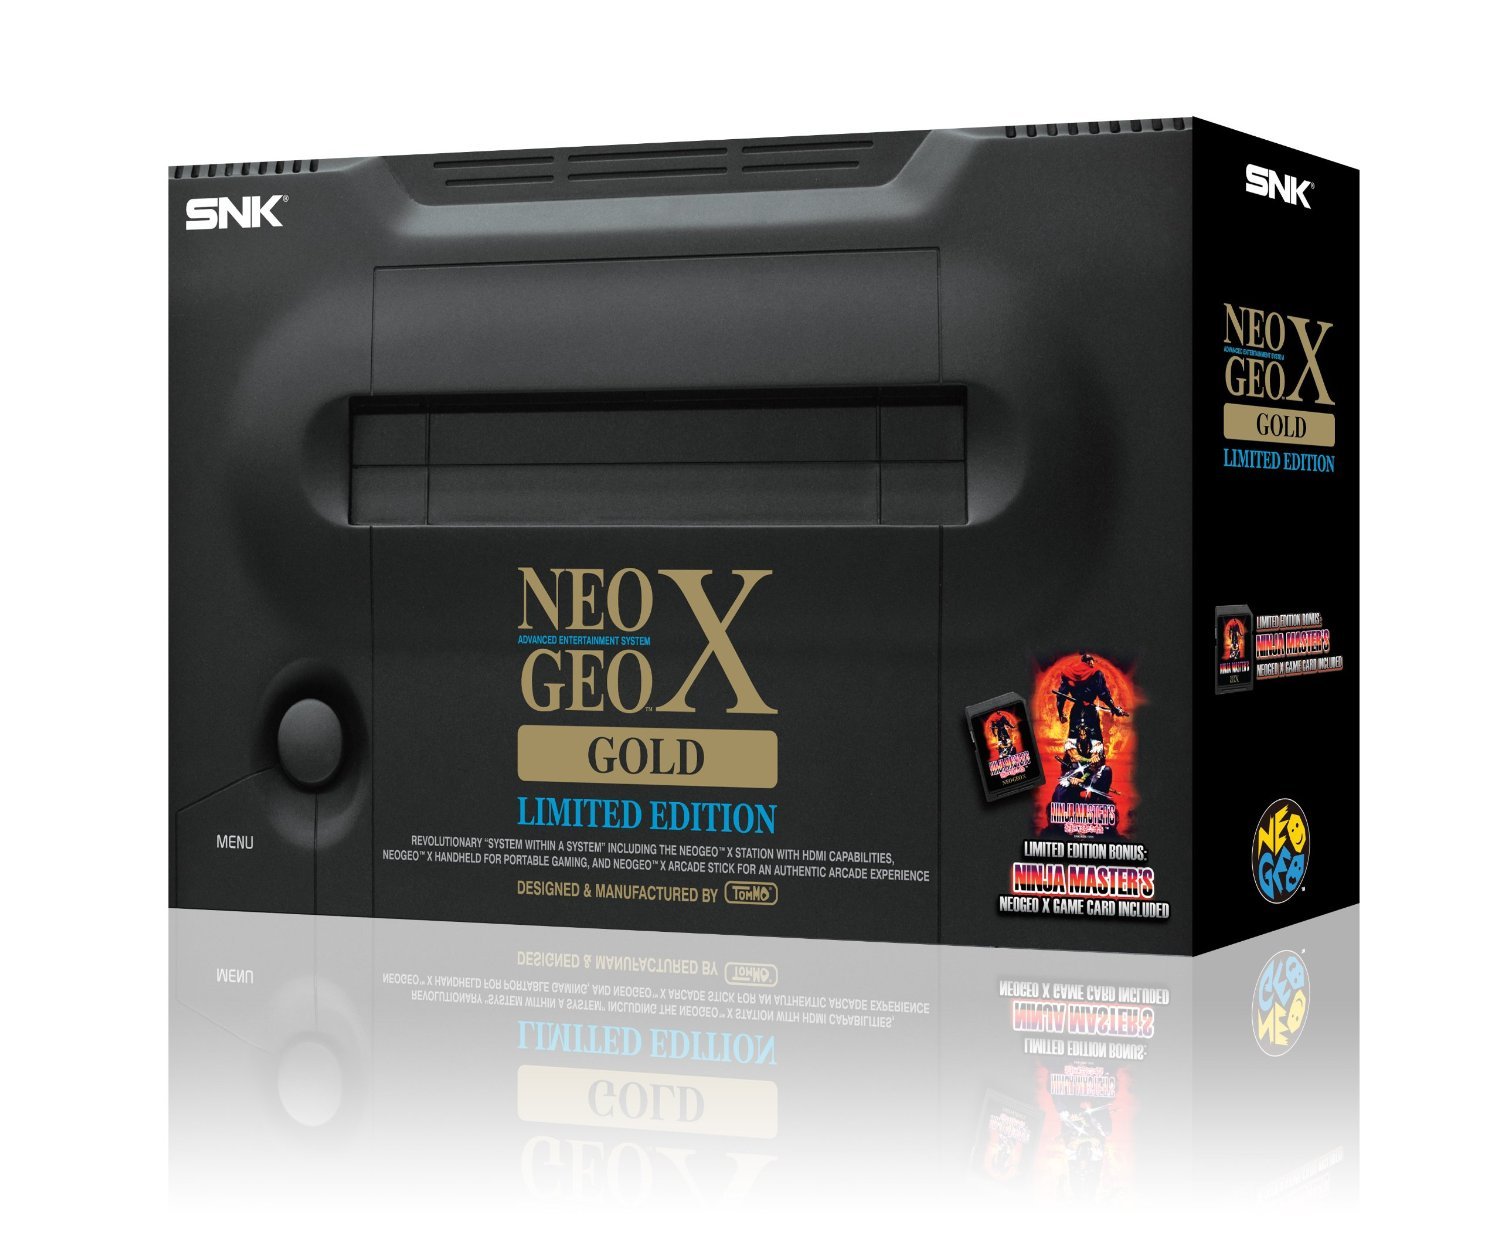 Neo Geo Pics, Video Game Collection